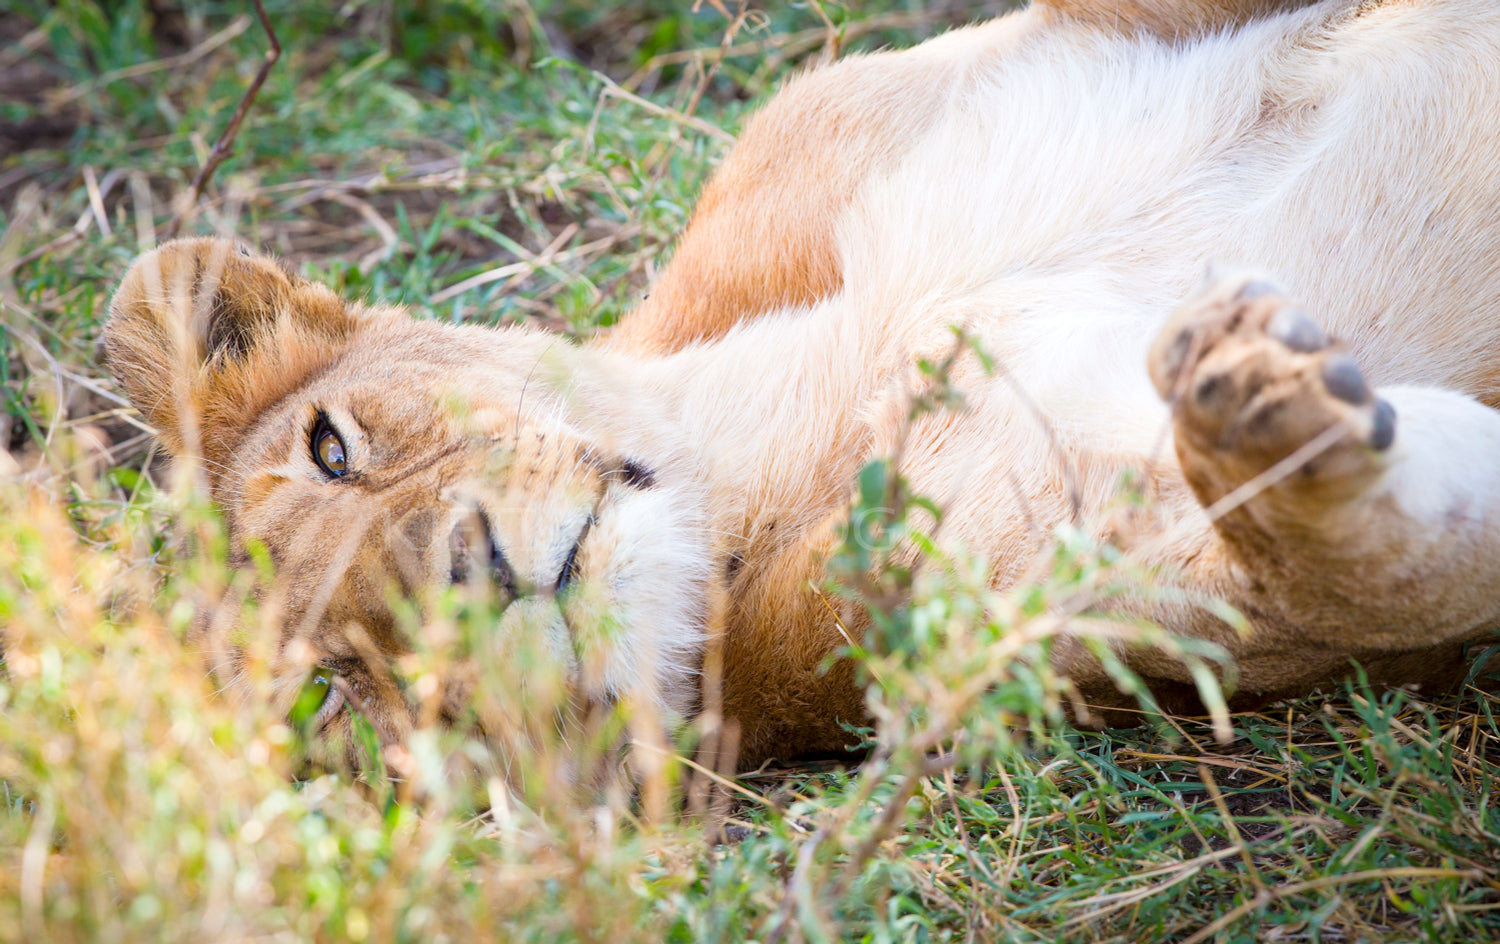 Cute young lion plays in grass at the savannah